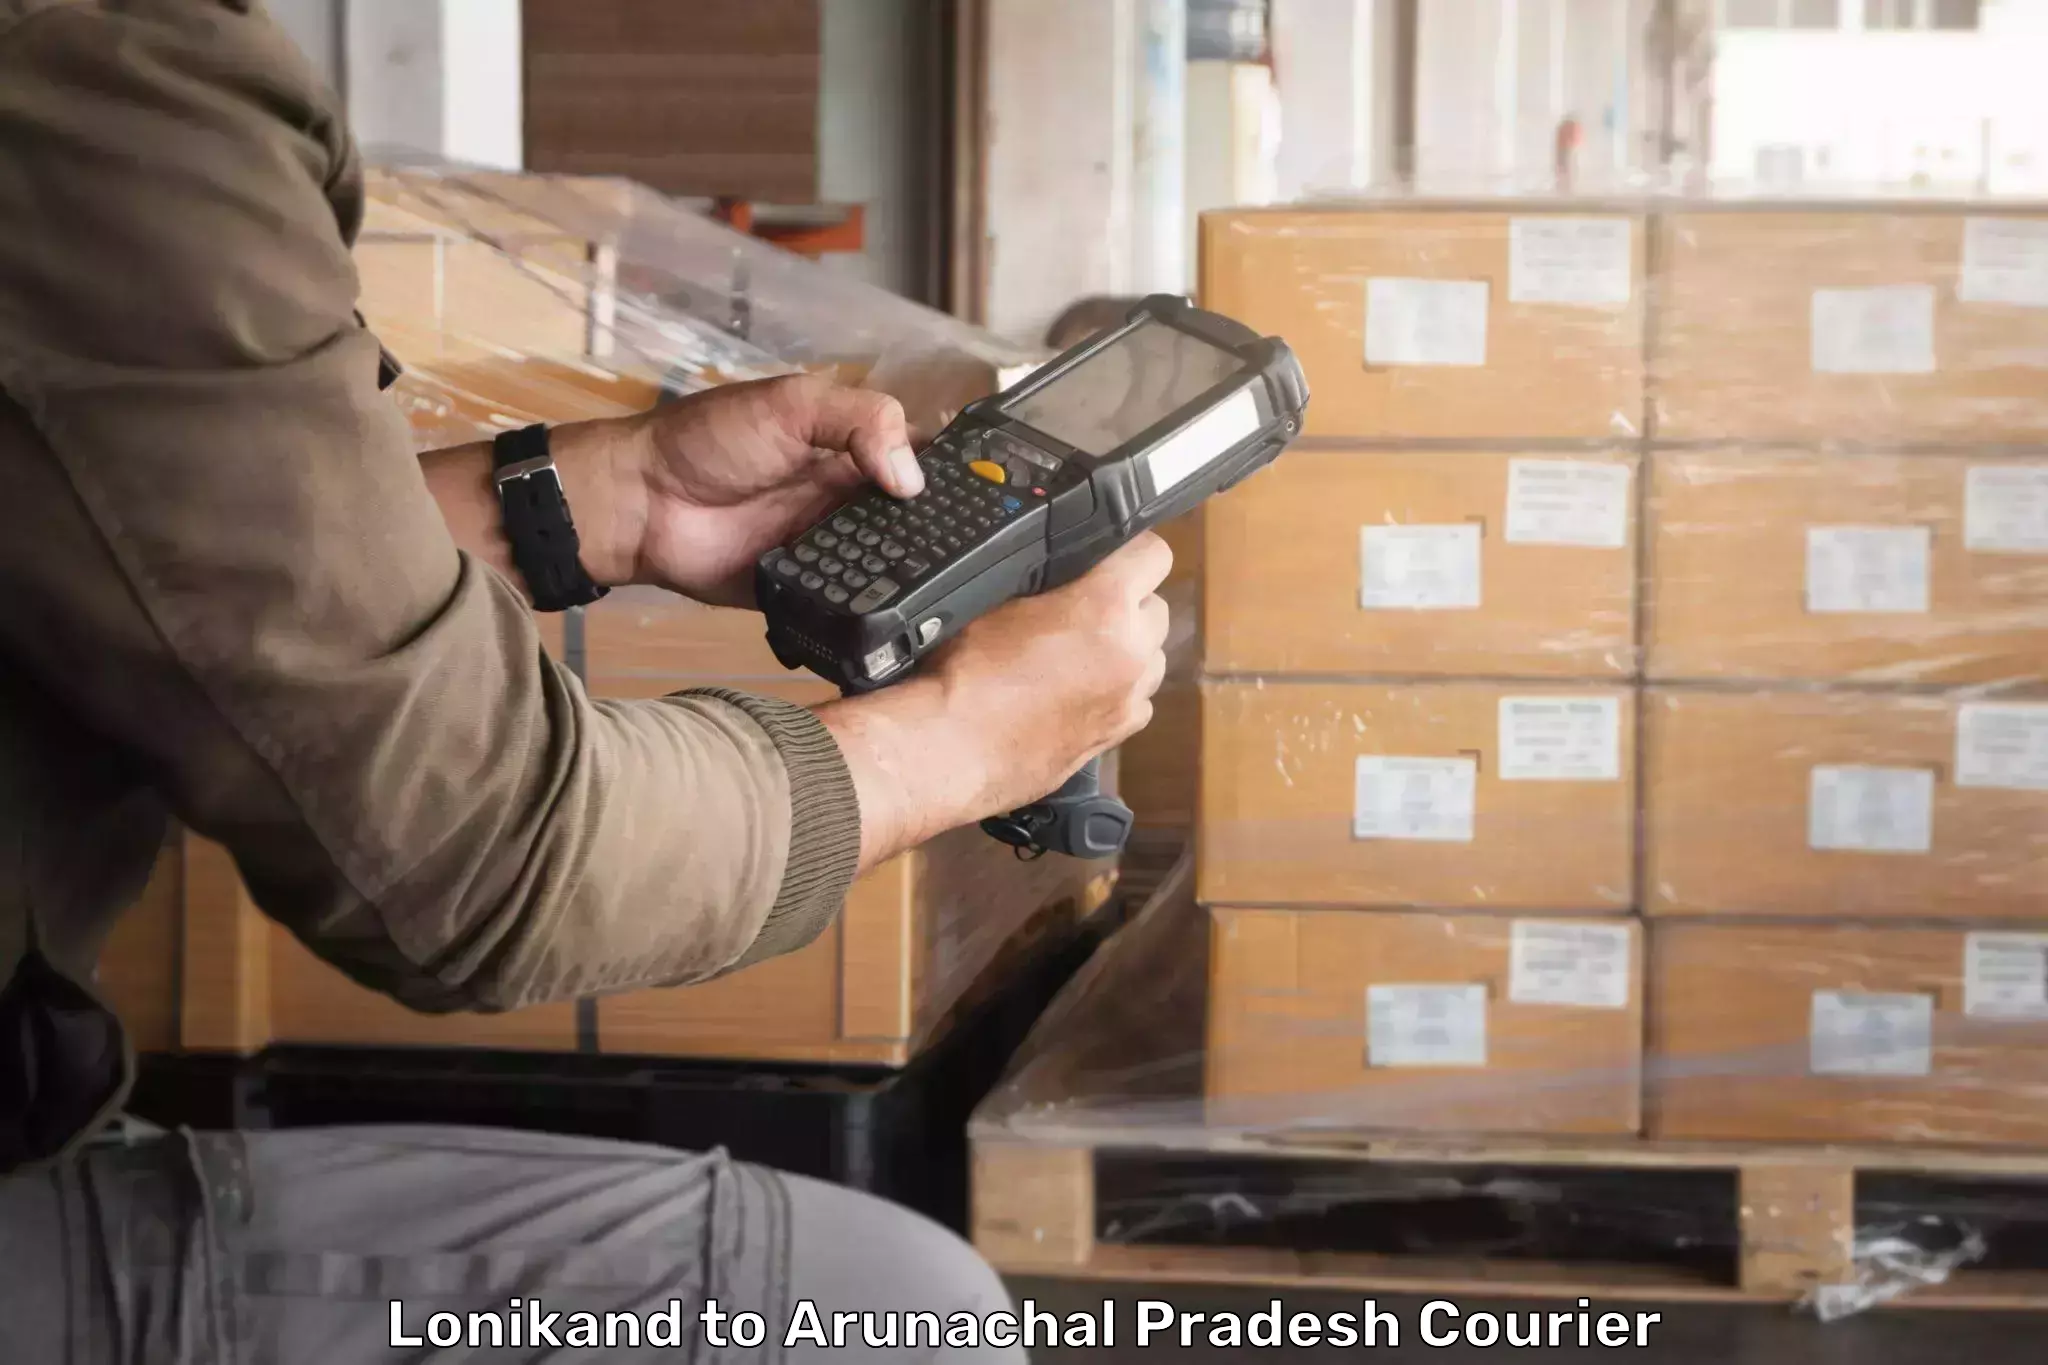 Digital courier platforms Lonikand to Aalo